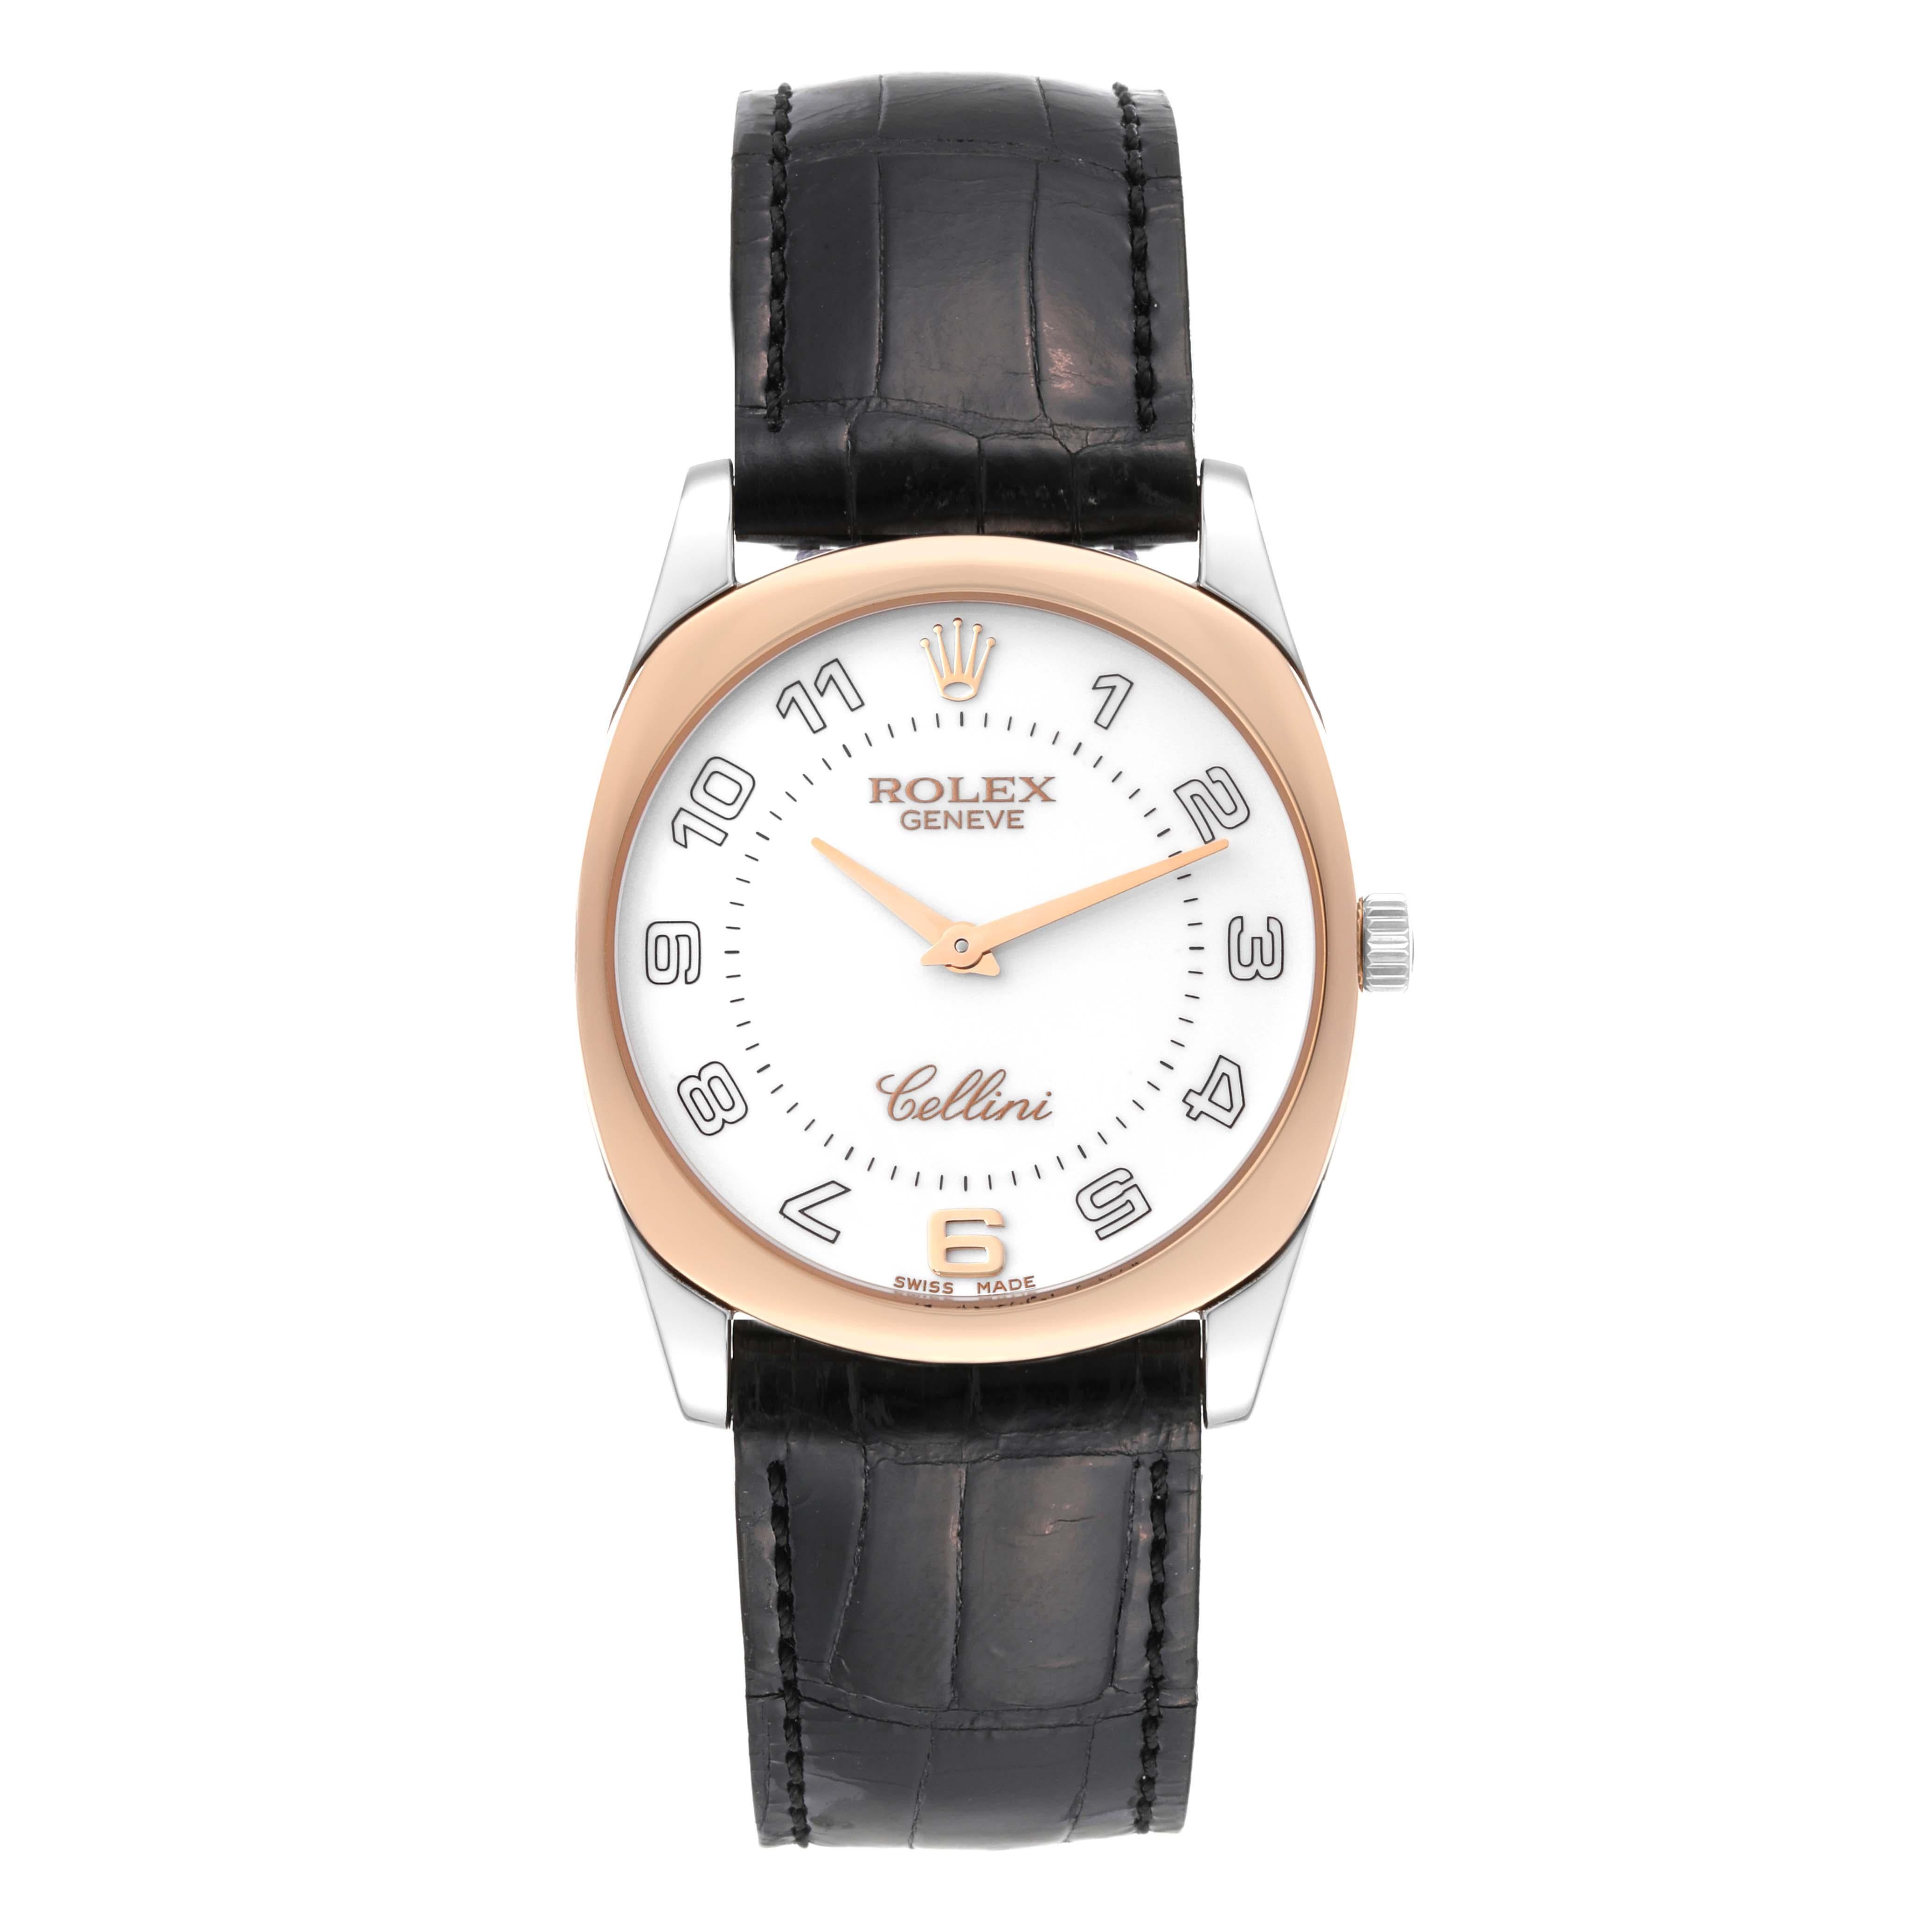 Rolex Cellini Danaos White Rose Gold Mens Watch 4233. Manual winding movement. 18k white and rose gold rounded rectangular case 34.0 mm. Rolex logo on a crown. . Scratch resistant sapphire crystal. White dial with oversized Arabic numeral hour